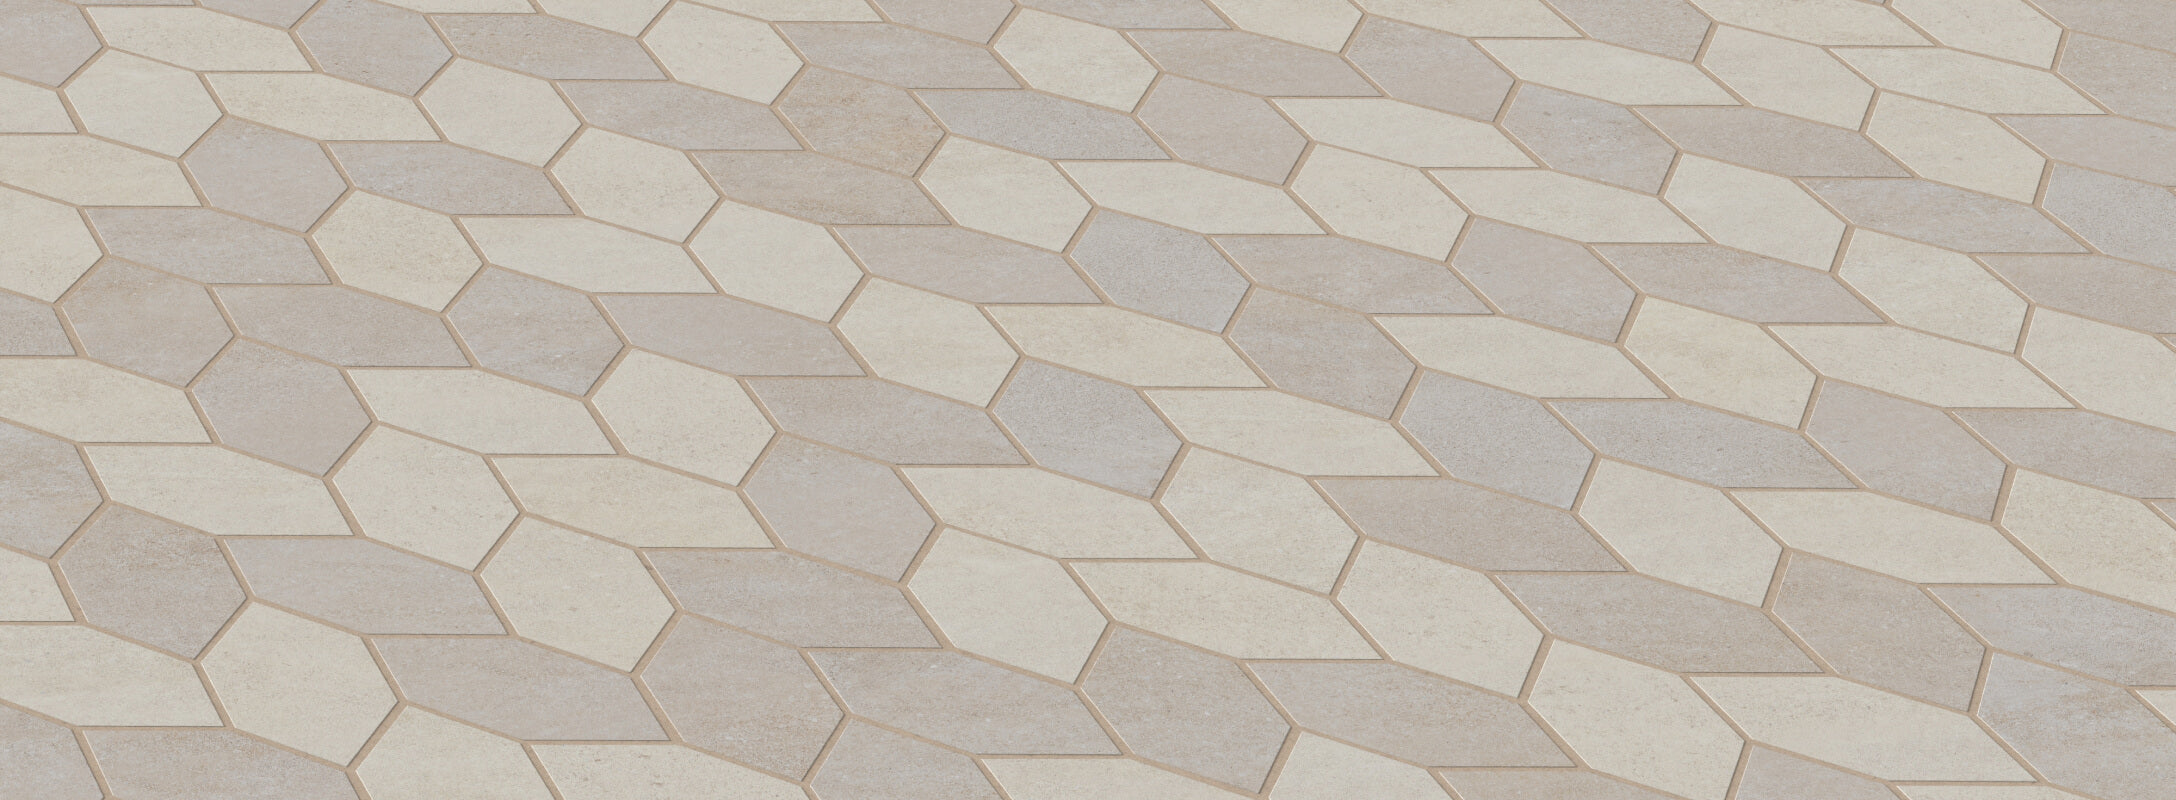 Beige and cream multicolored geometric mosaic tiles, creating a sophisticated pattern for a modern shower floor